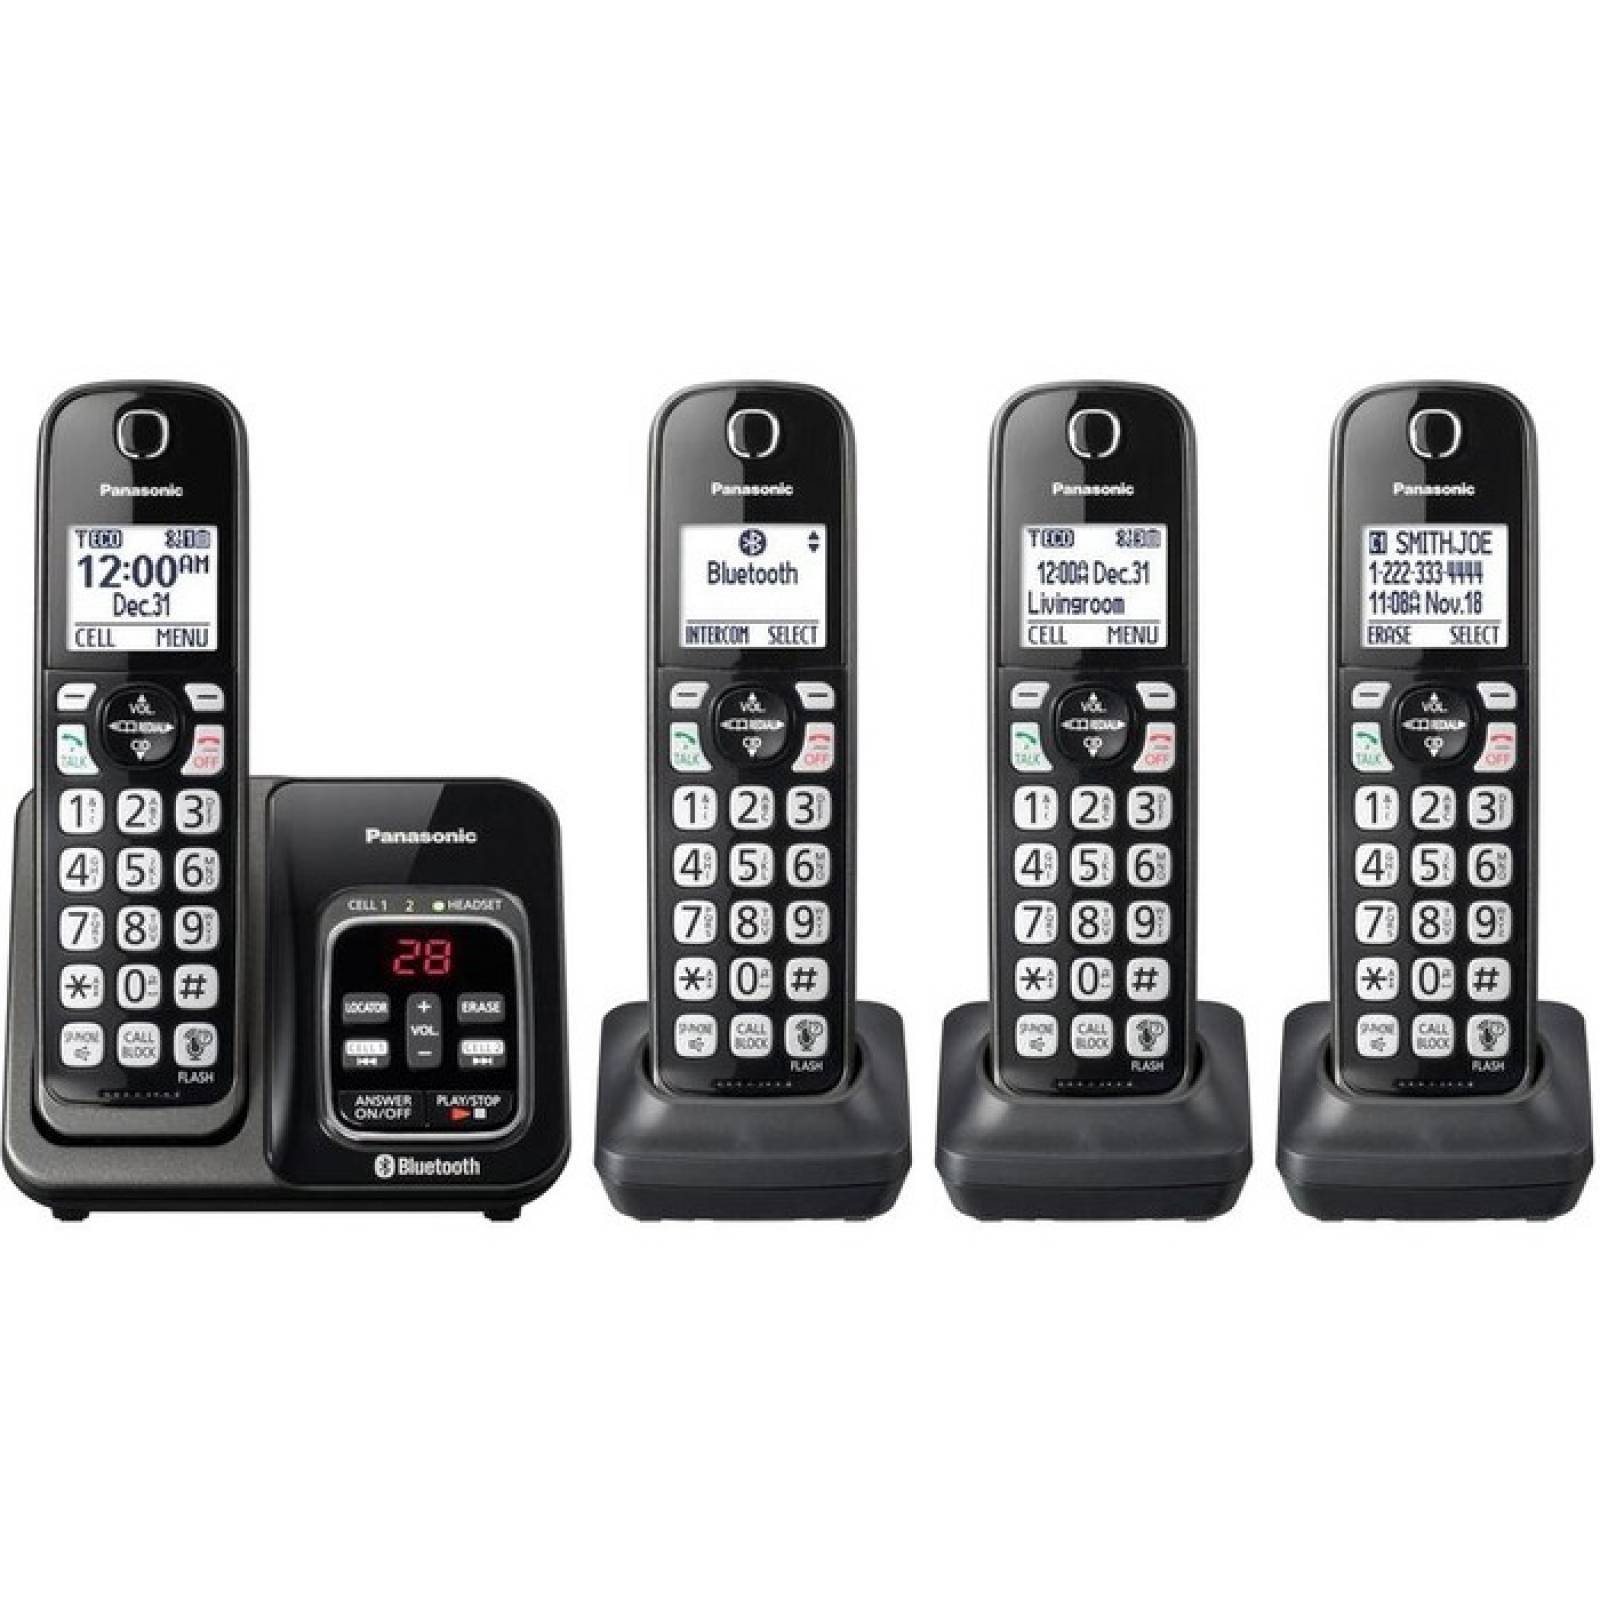 Telfono inalmbrico Panasonic Link2Cell KXTGD564M DECT 60 a 193 GHz  Negro metlico